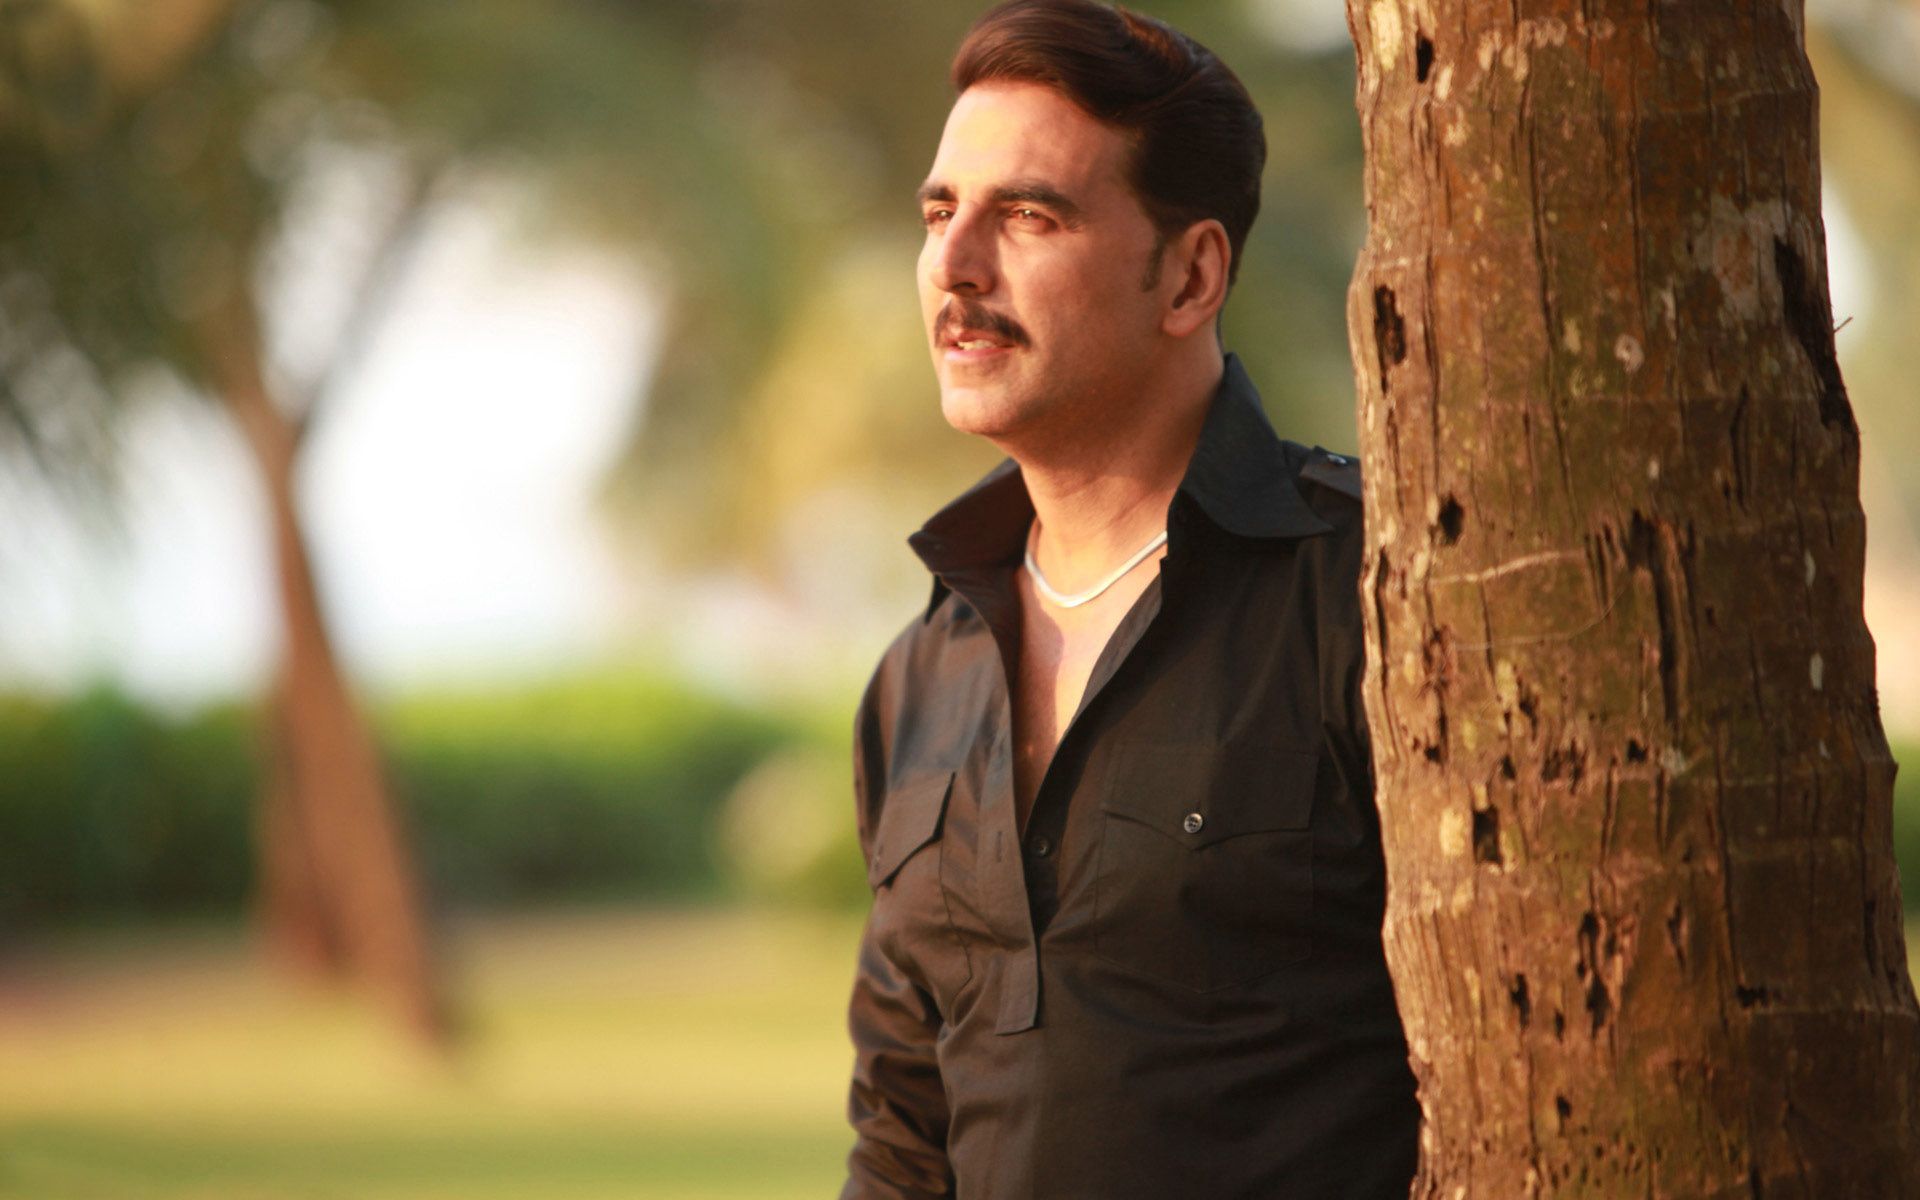 Akshay Kumar Gallery of Wallpaper. Free Download For Android, Desktop and Laptops